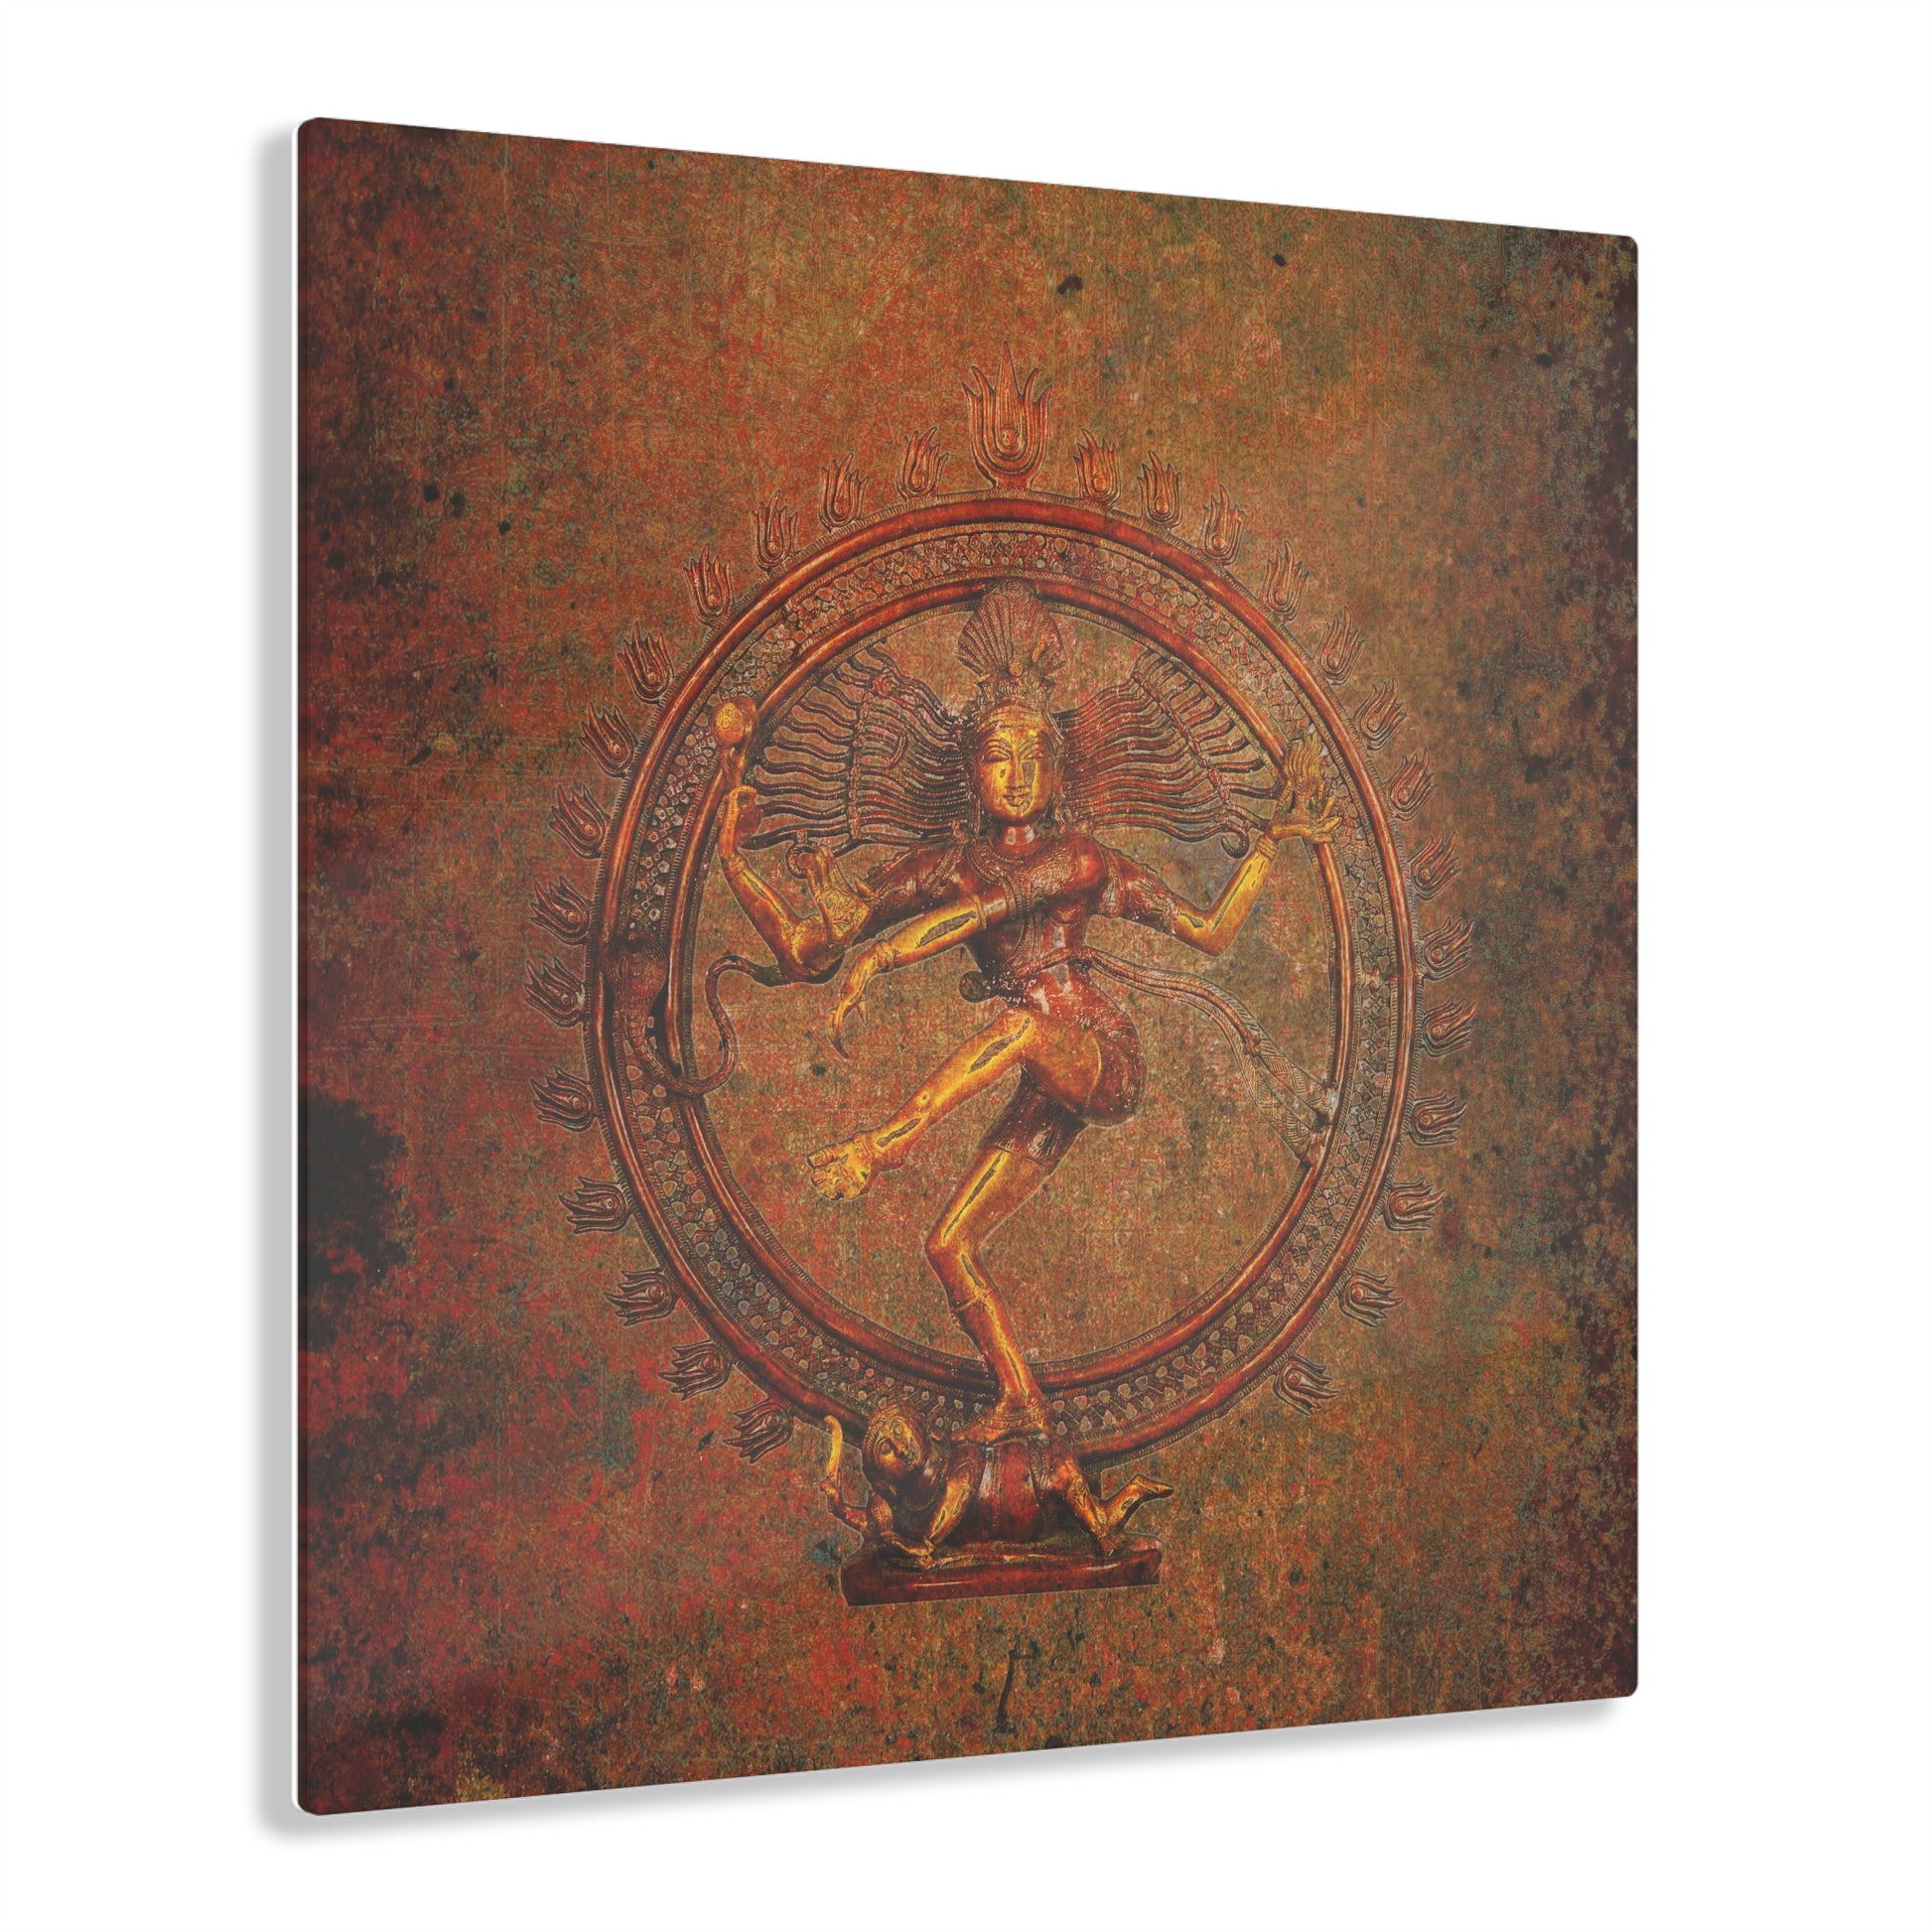 Hindu God Shiva on a Distressed Stone Background Printed on a Crystal Clear Acrylic Panel